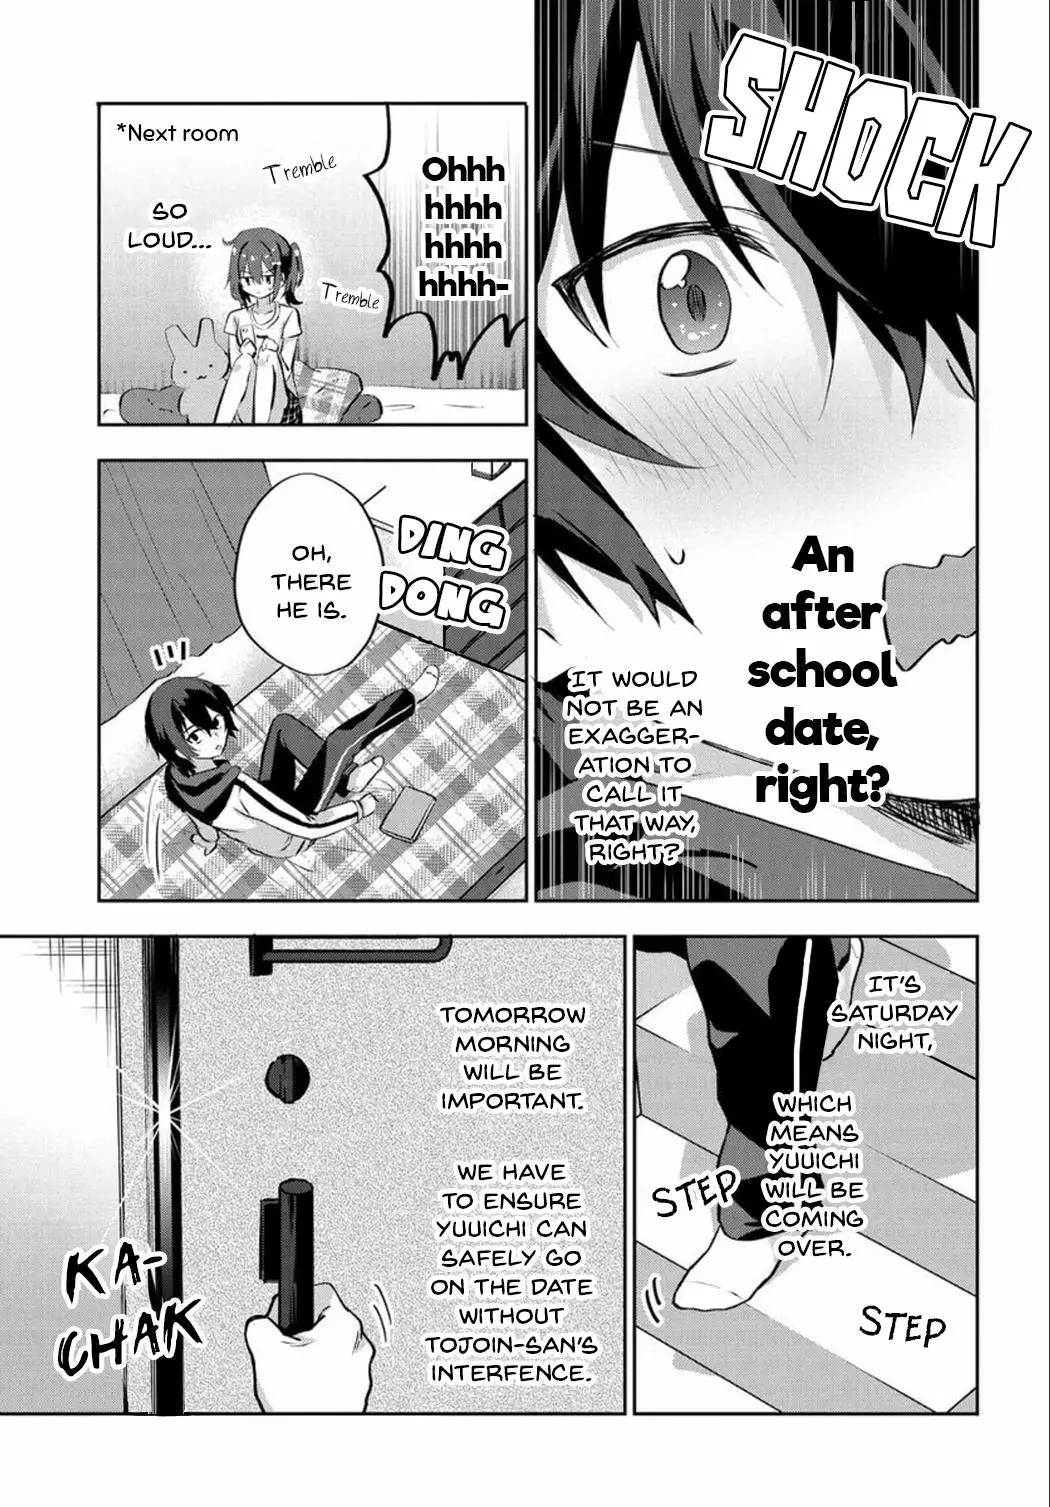 Since I’Ve Entered The World Of Romantic Comedy Manga, I’Ll Do My Best To Make The Losing Heroine Happy - 5.2 page 5-83c18b9a